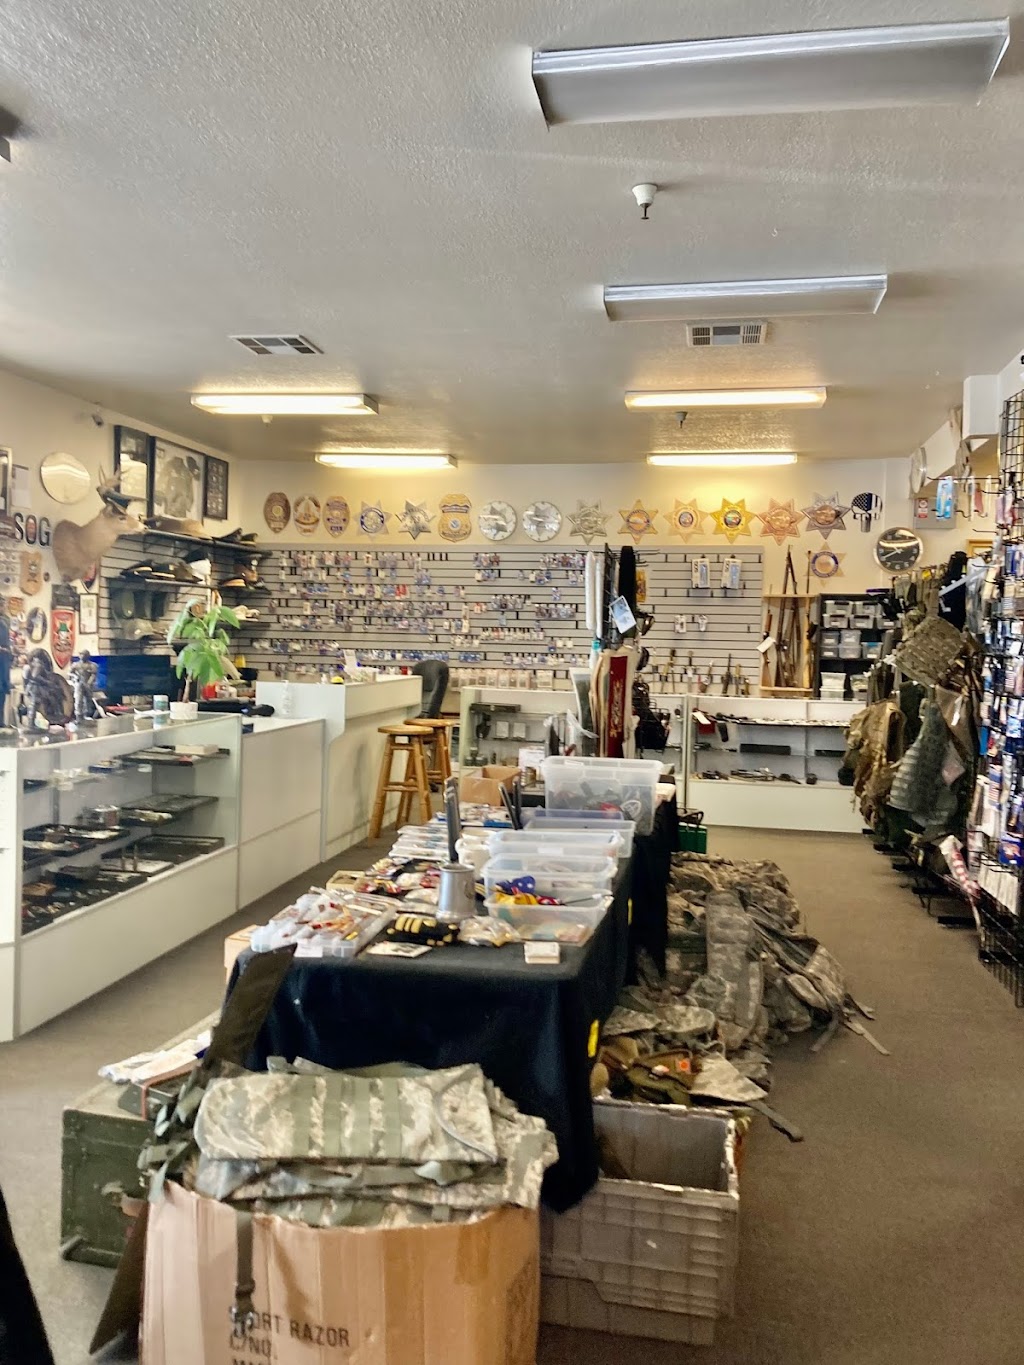 S.O.G. Military Surplus Collectibles | 8581 Gravenstein Hwy, Cotati, CA 94931 | Phone: (707) 588-8438